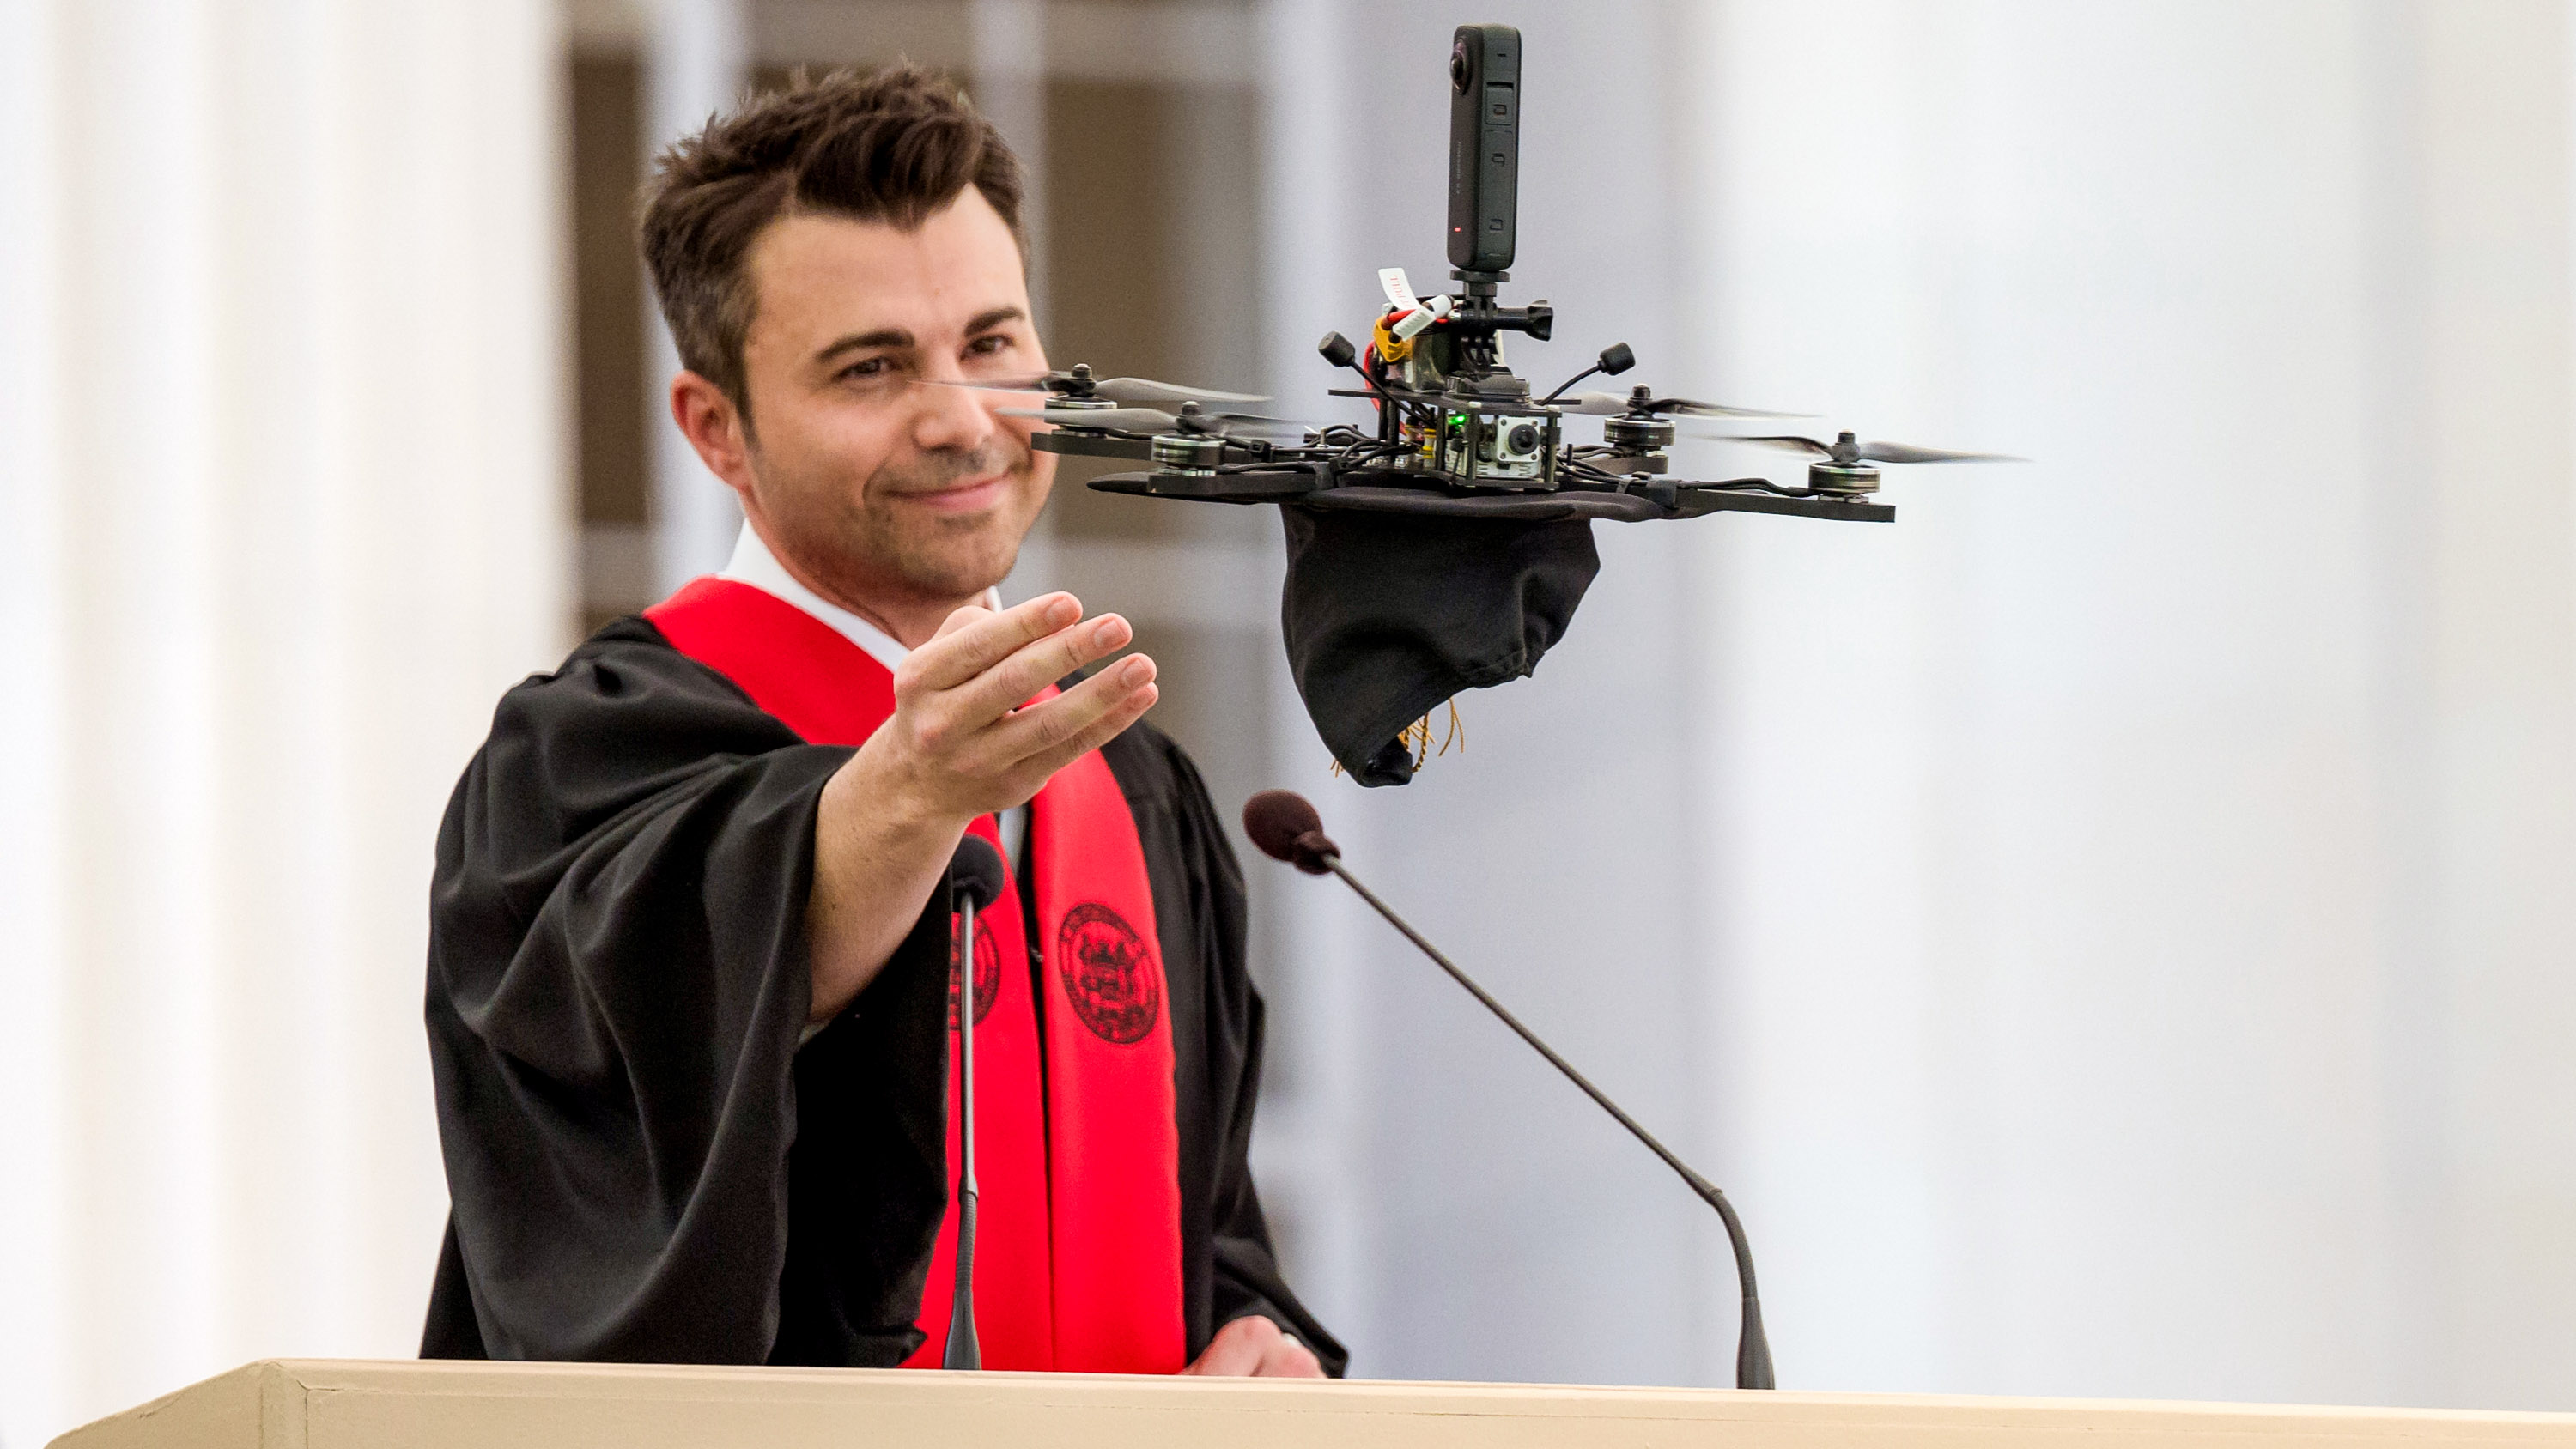 Mark Rober at the commencement podium with one hand outstretch toward a drone hovering in the air just in front of him